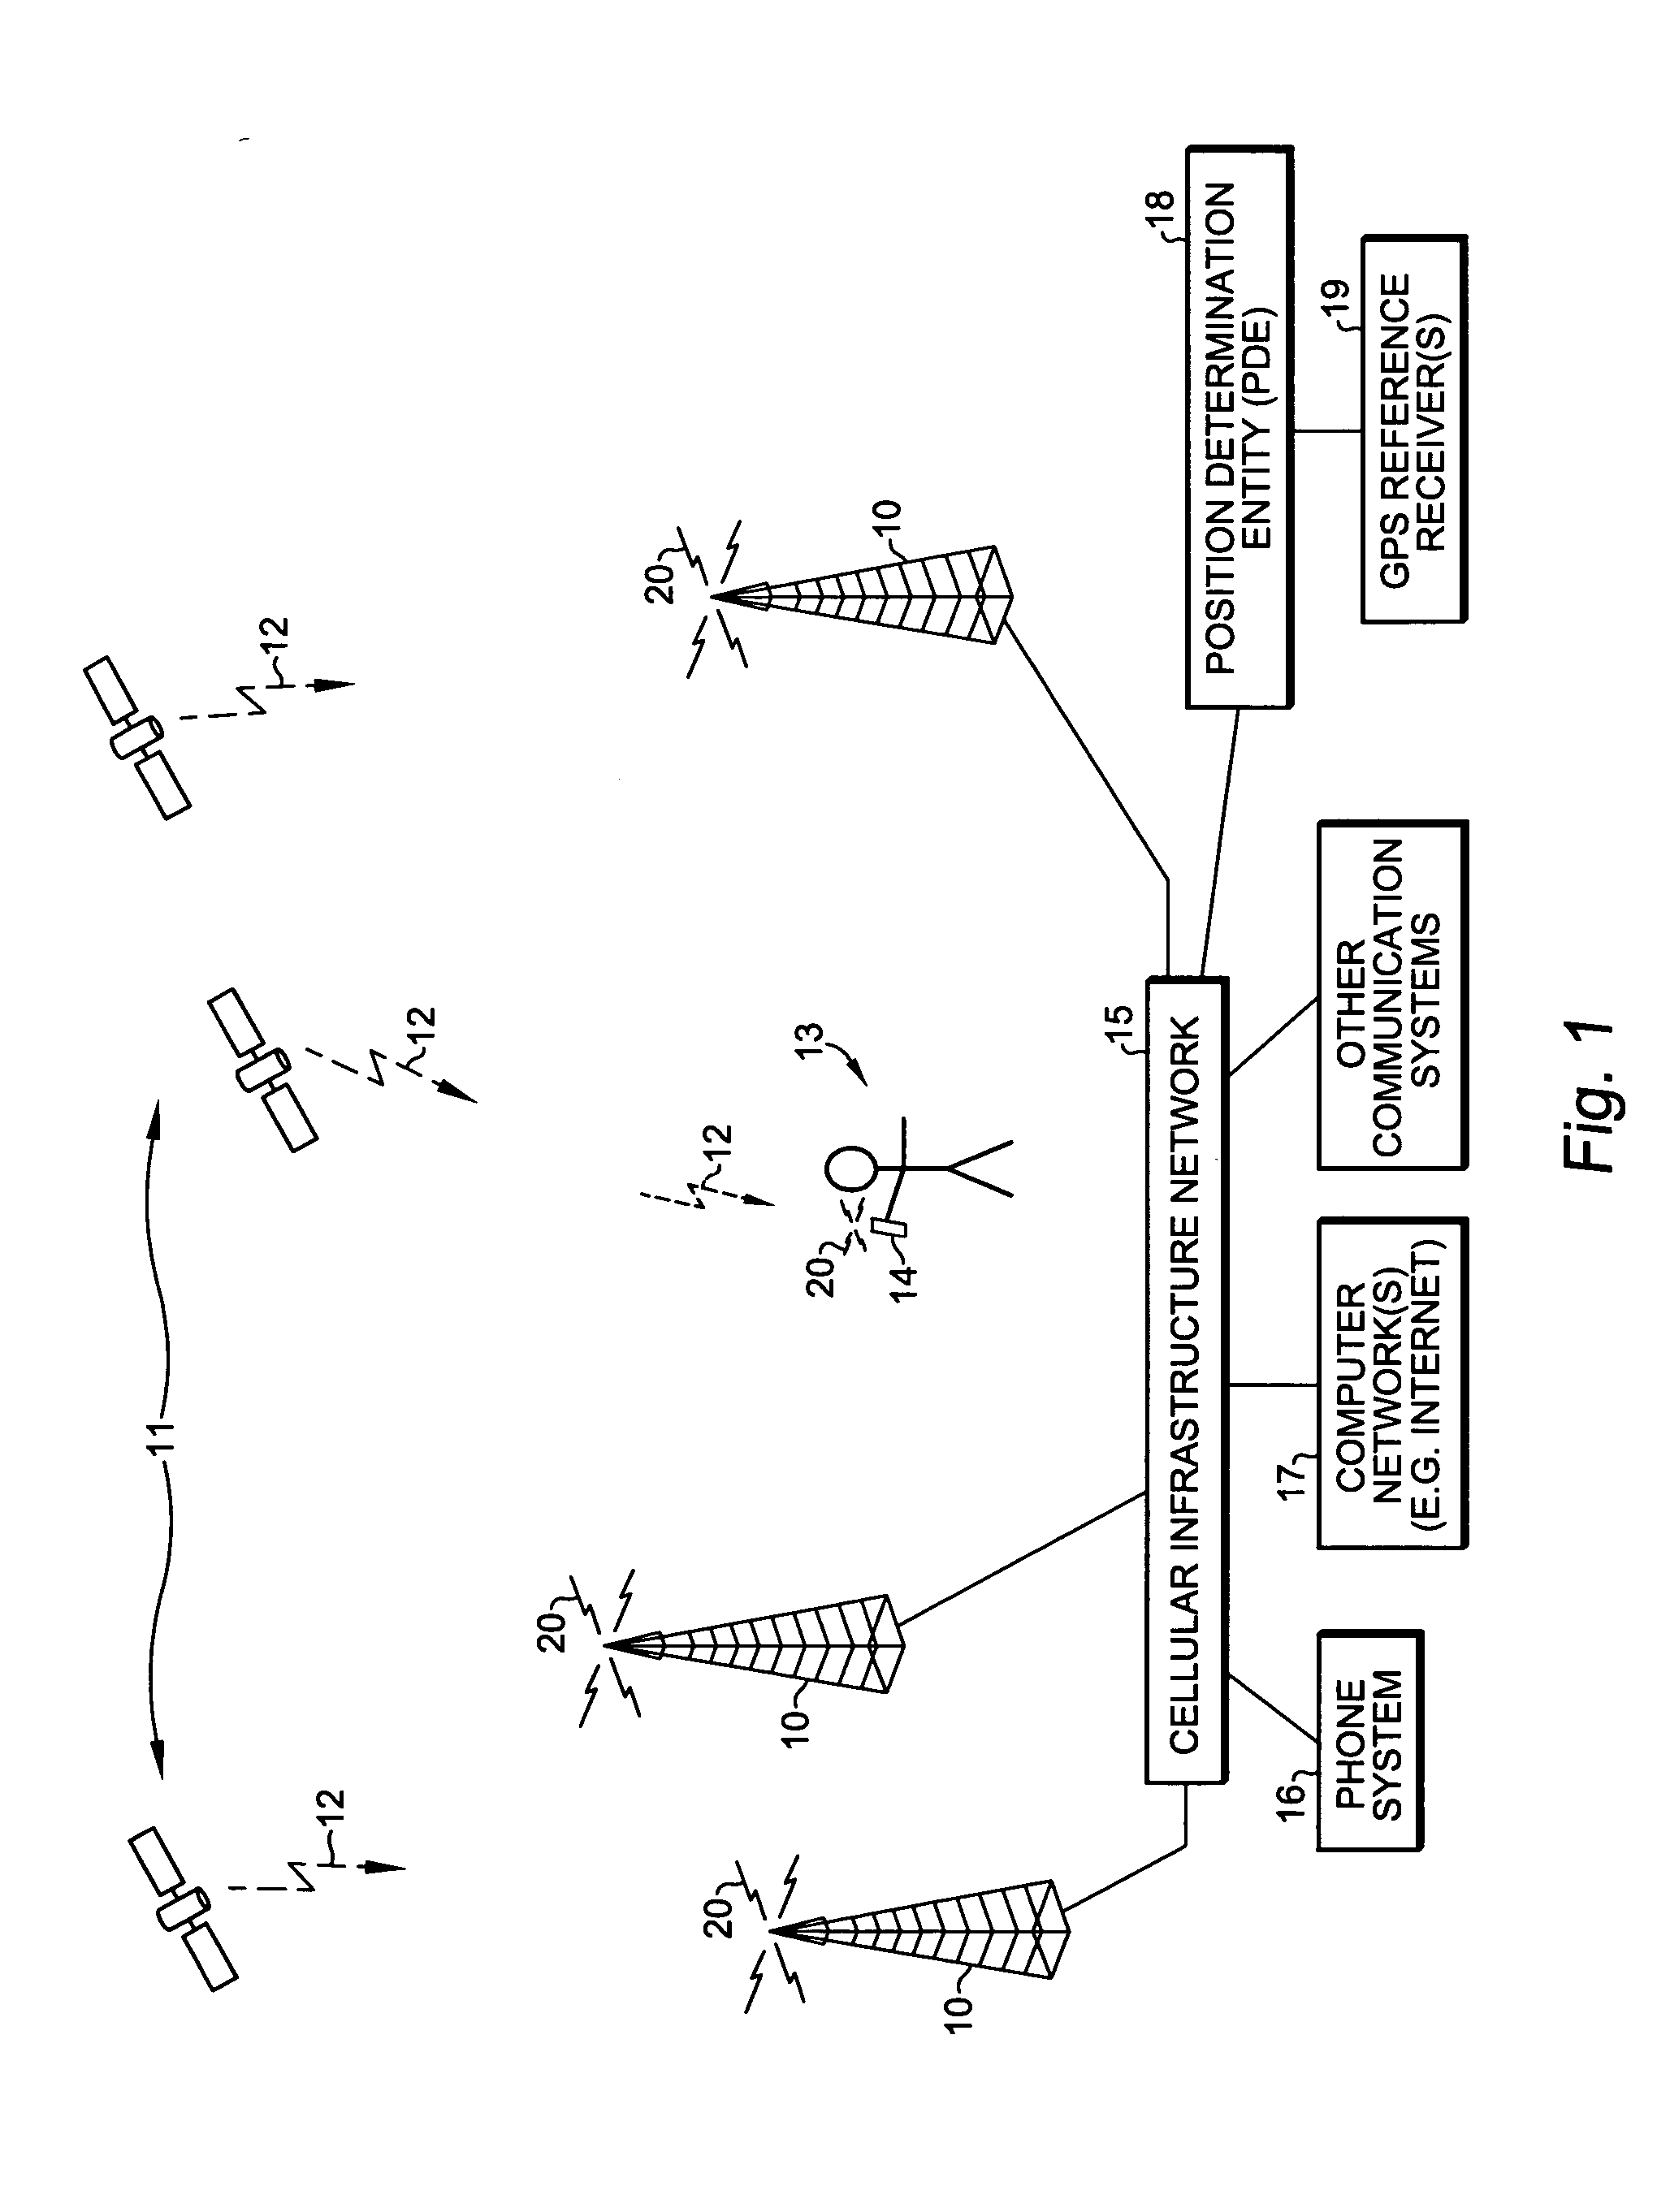 Rapid acquisition methods and apparatus for GPS signals